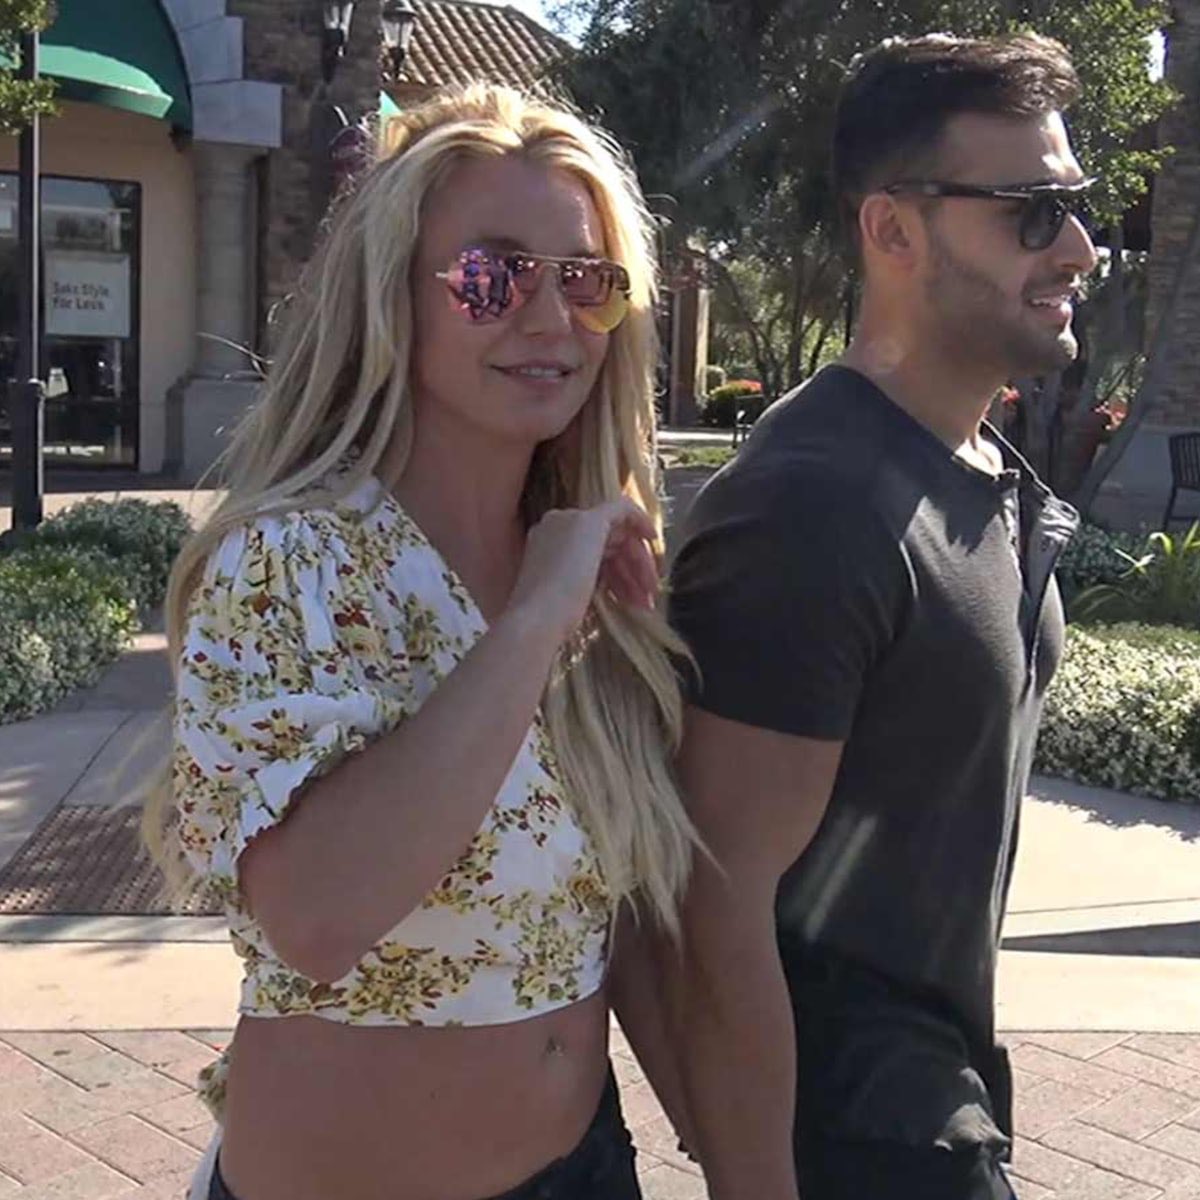 Britney shopping at the Disney Store in 2019.